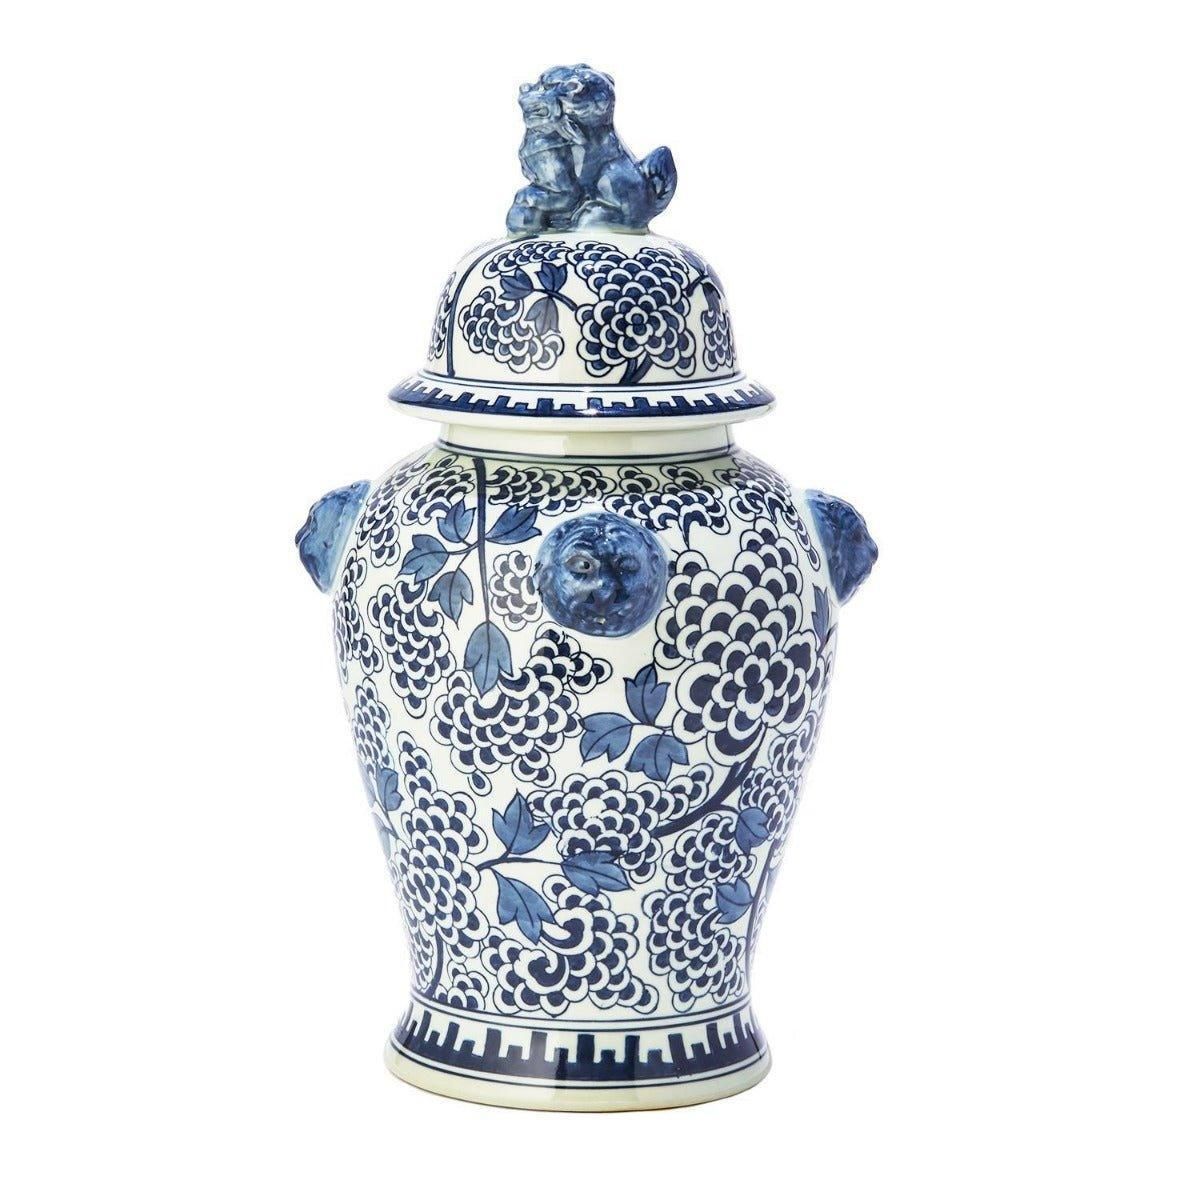 Blue and White Peony Flower Design Porcelain Covered Temple Jar | The Well Appointed House, LLC